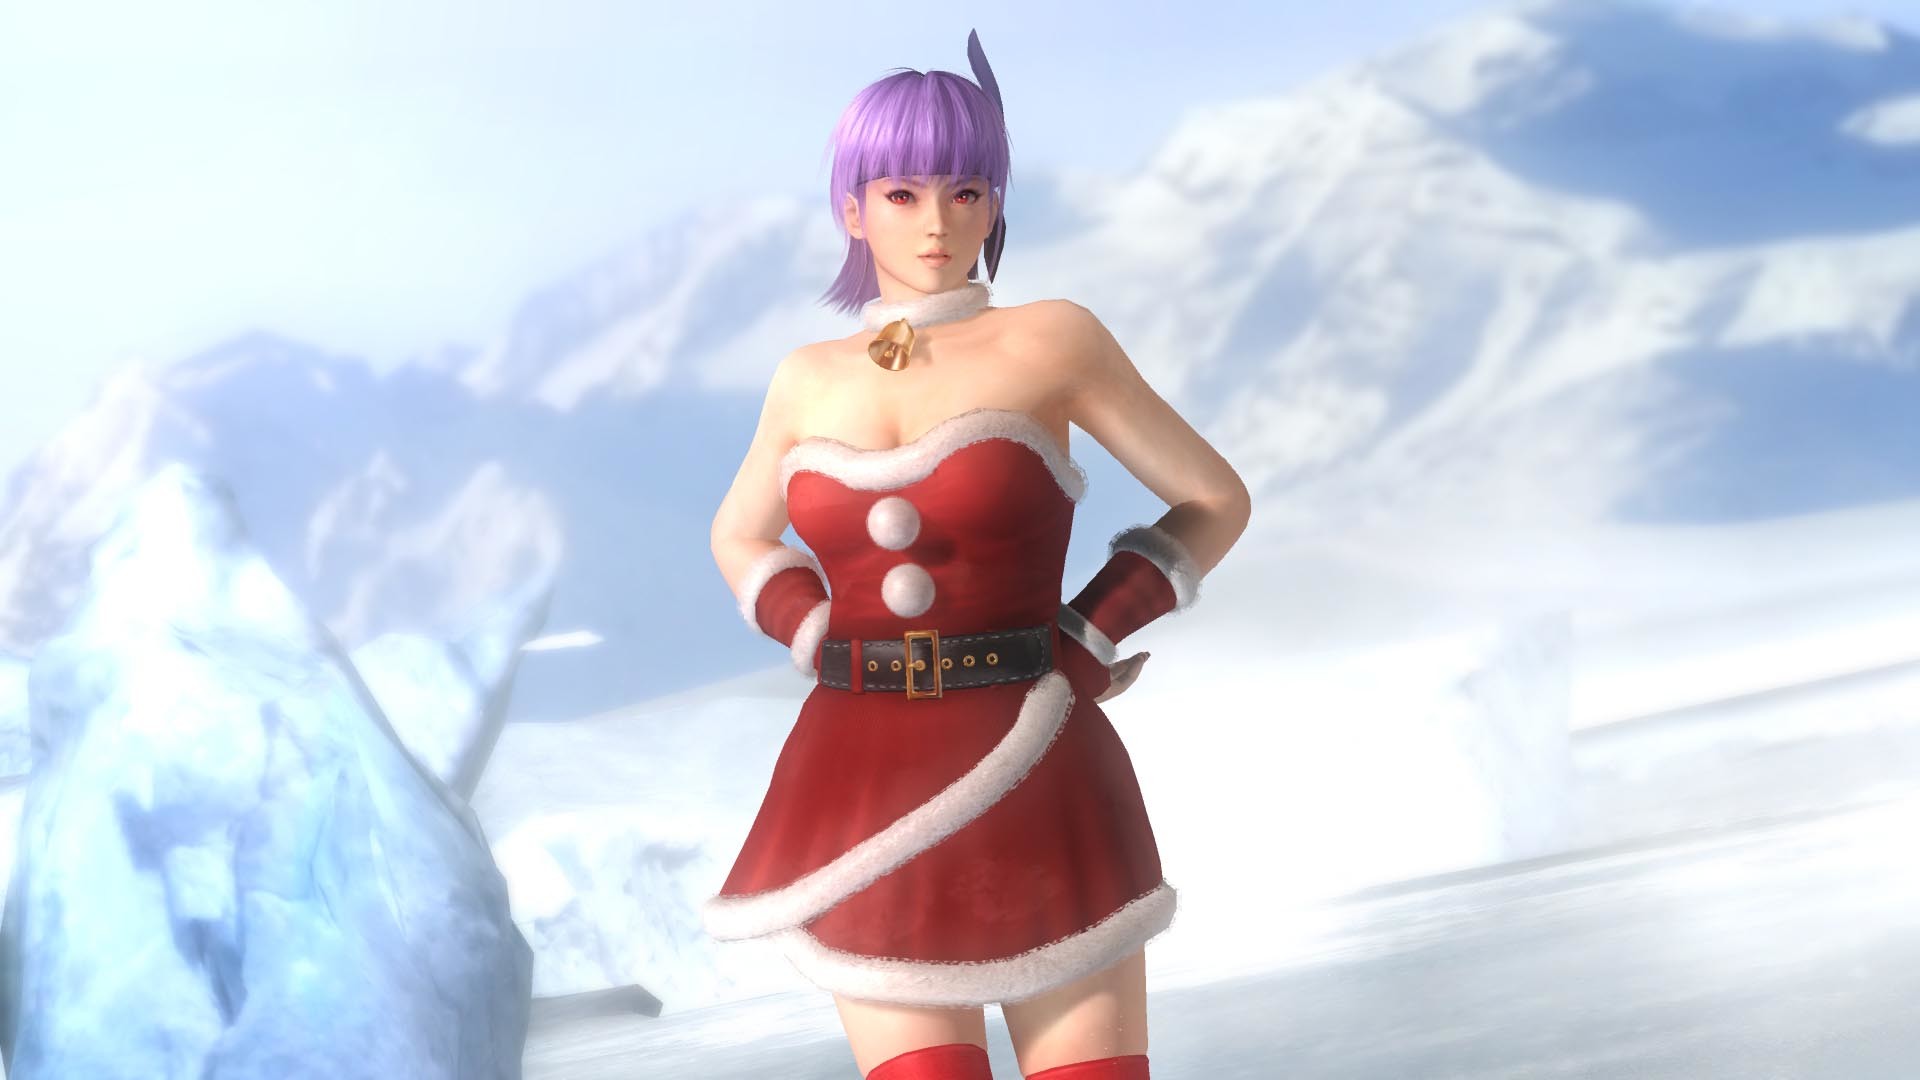 Ayane images Dead or Alive 5 Ayane HD wallpaper and background photos